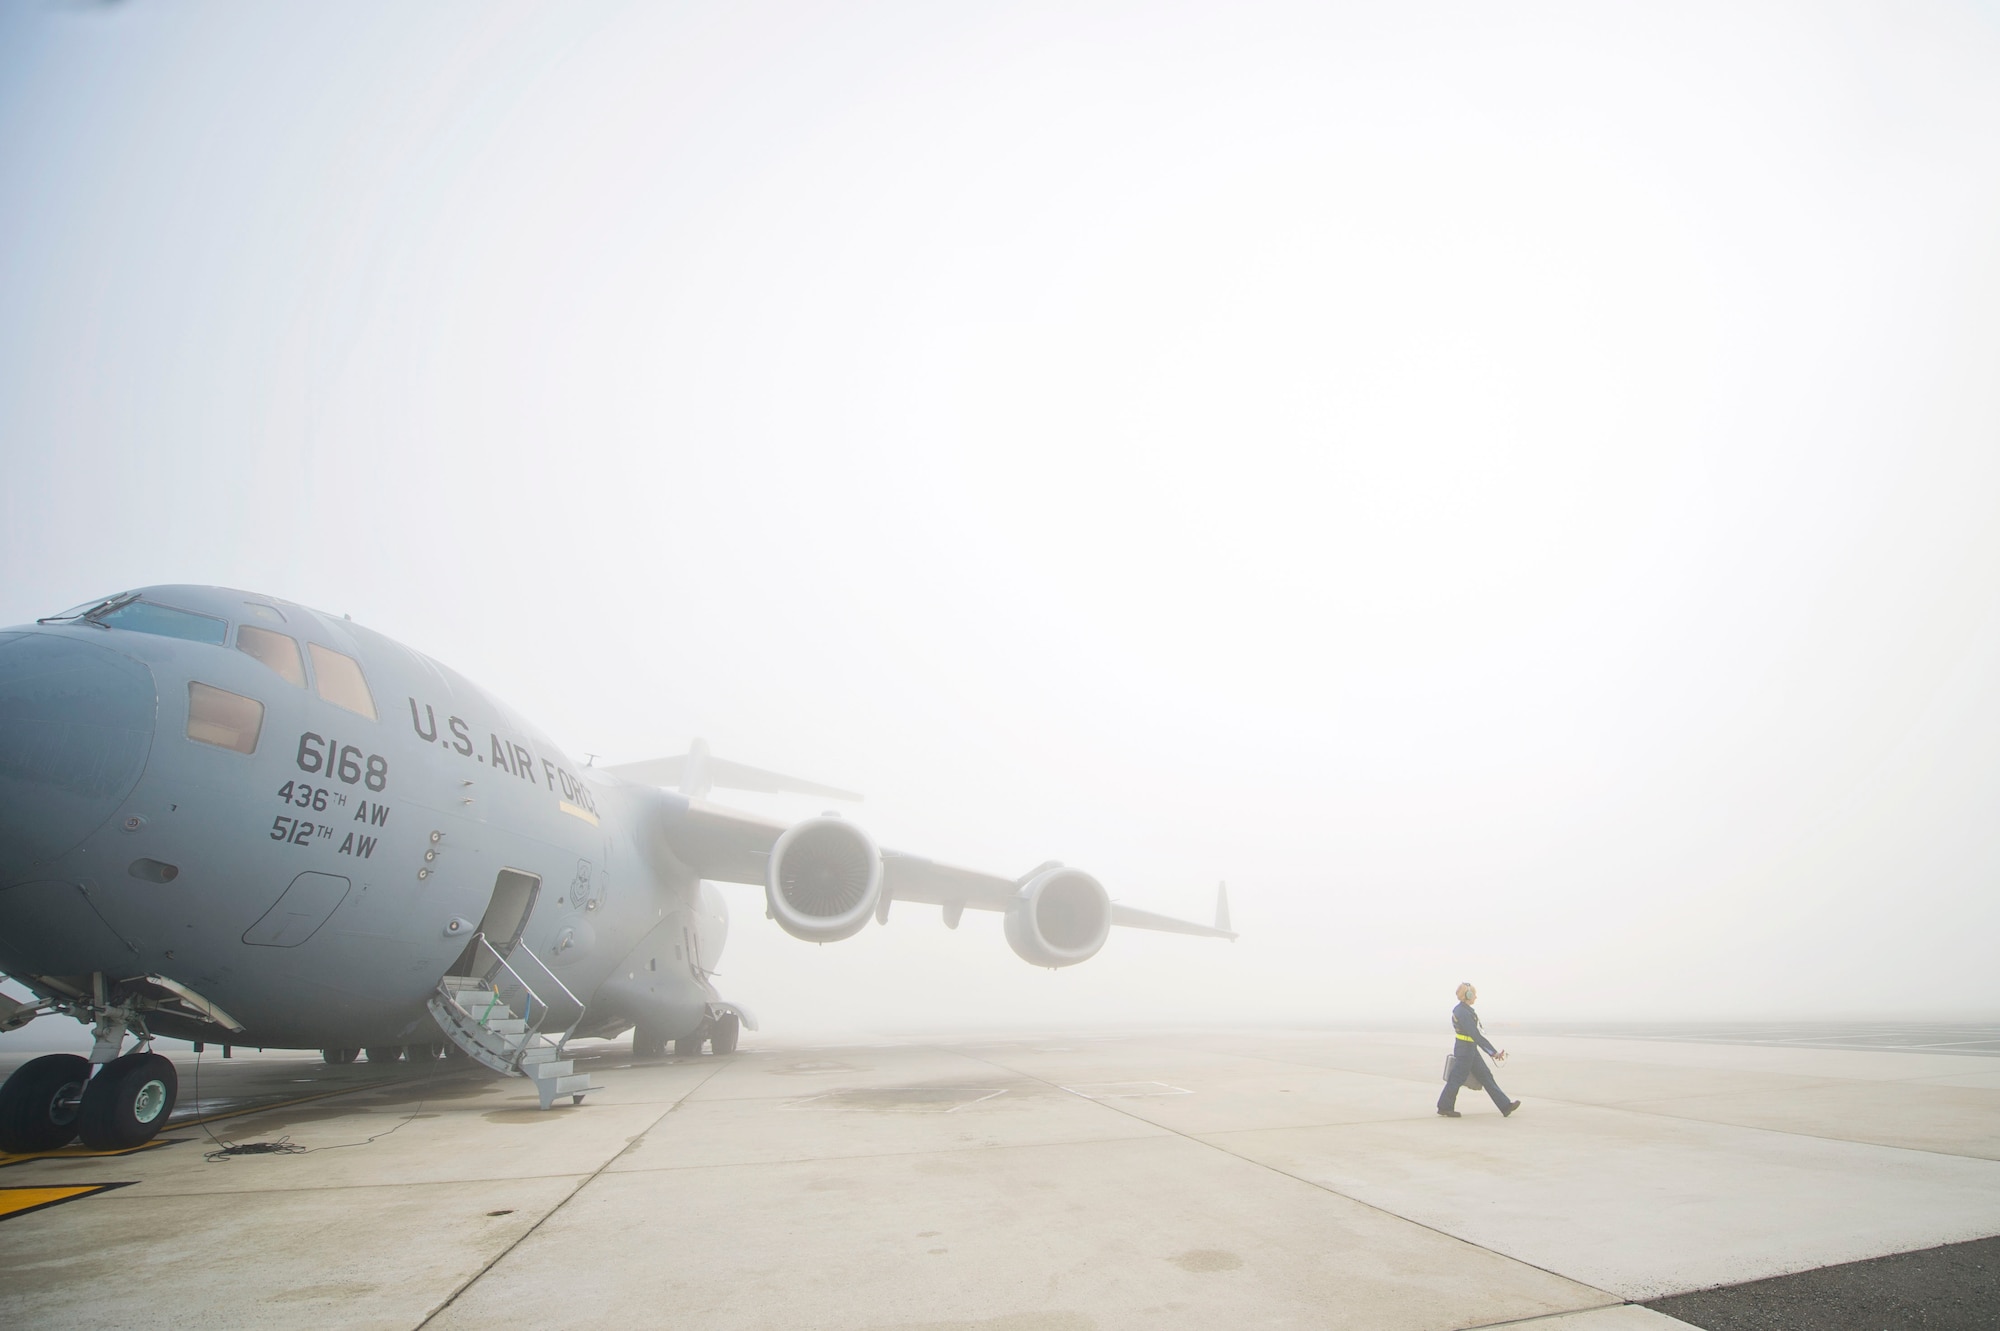 Tech. Sgt. Christing King, 512th Airlift Wing, walks through the fog away from her C-17 Globemaster III aircraft to get additional equipment needed to marshal the aircraft to the flightline on Dover Air Force Base, Del., March 17, 2016. King is a dedicated crew chief assigned to this specific aircraft and is knowledgeable in all maintenance areas of the jet. (U.S. Air Force photo/ Capt. Bernie Kale)